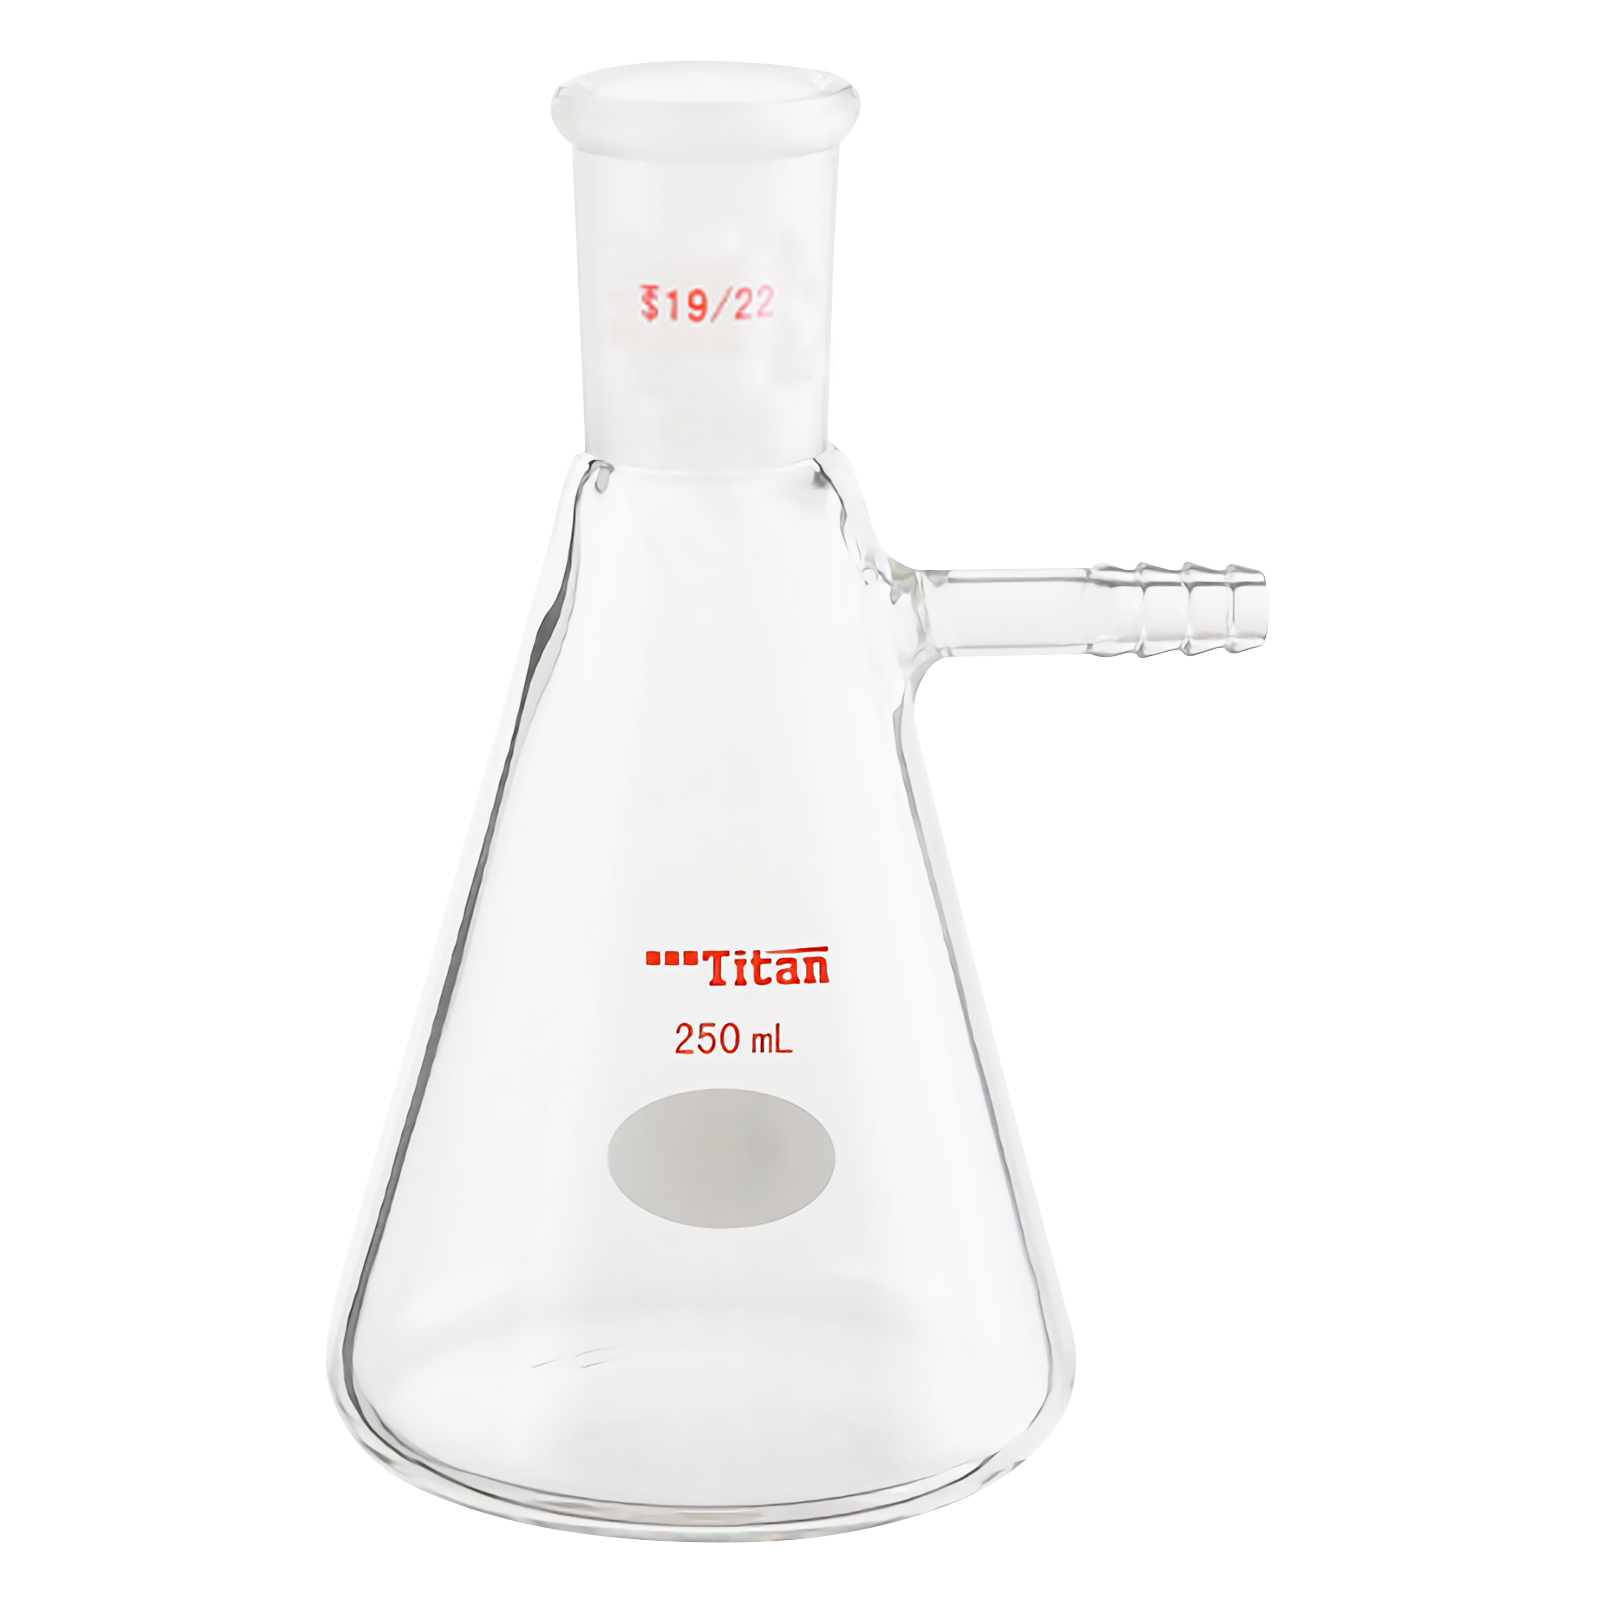 ADAMAS-BETA Glass Suction Bottle with Grinding Mouth 19/22 24/40 Laboratory Conical Flask 250ml 500ml Upper Pipe Solution Reagent Filter Bottles